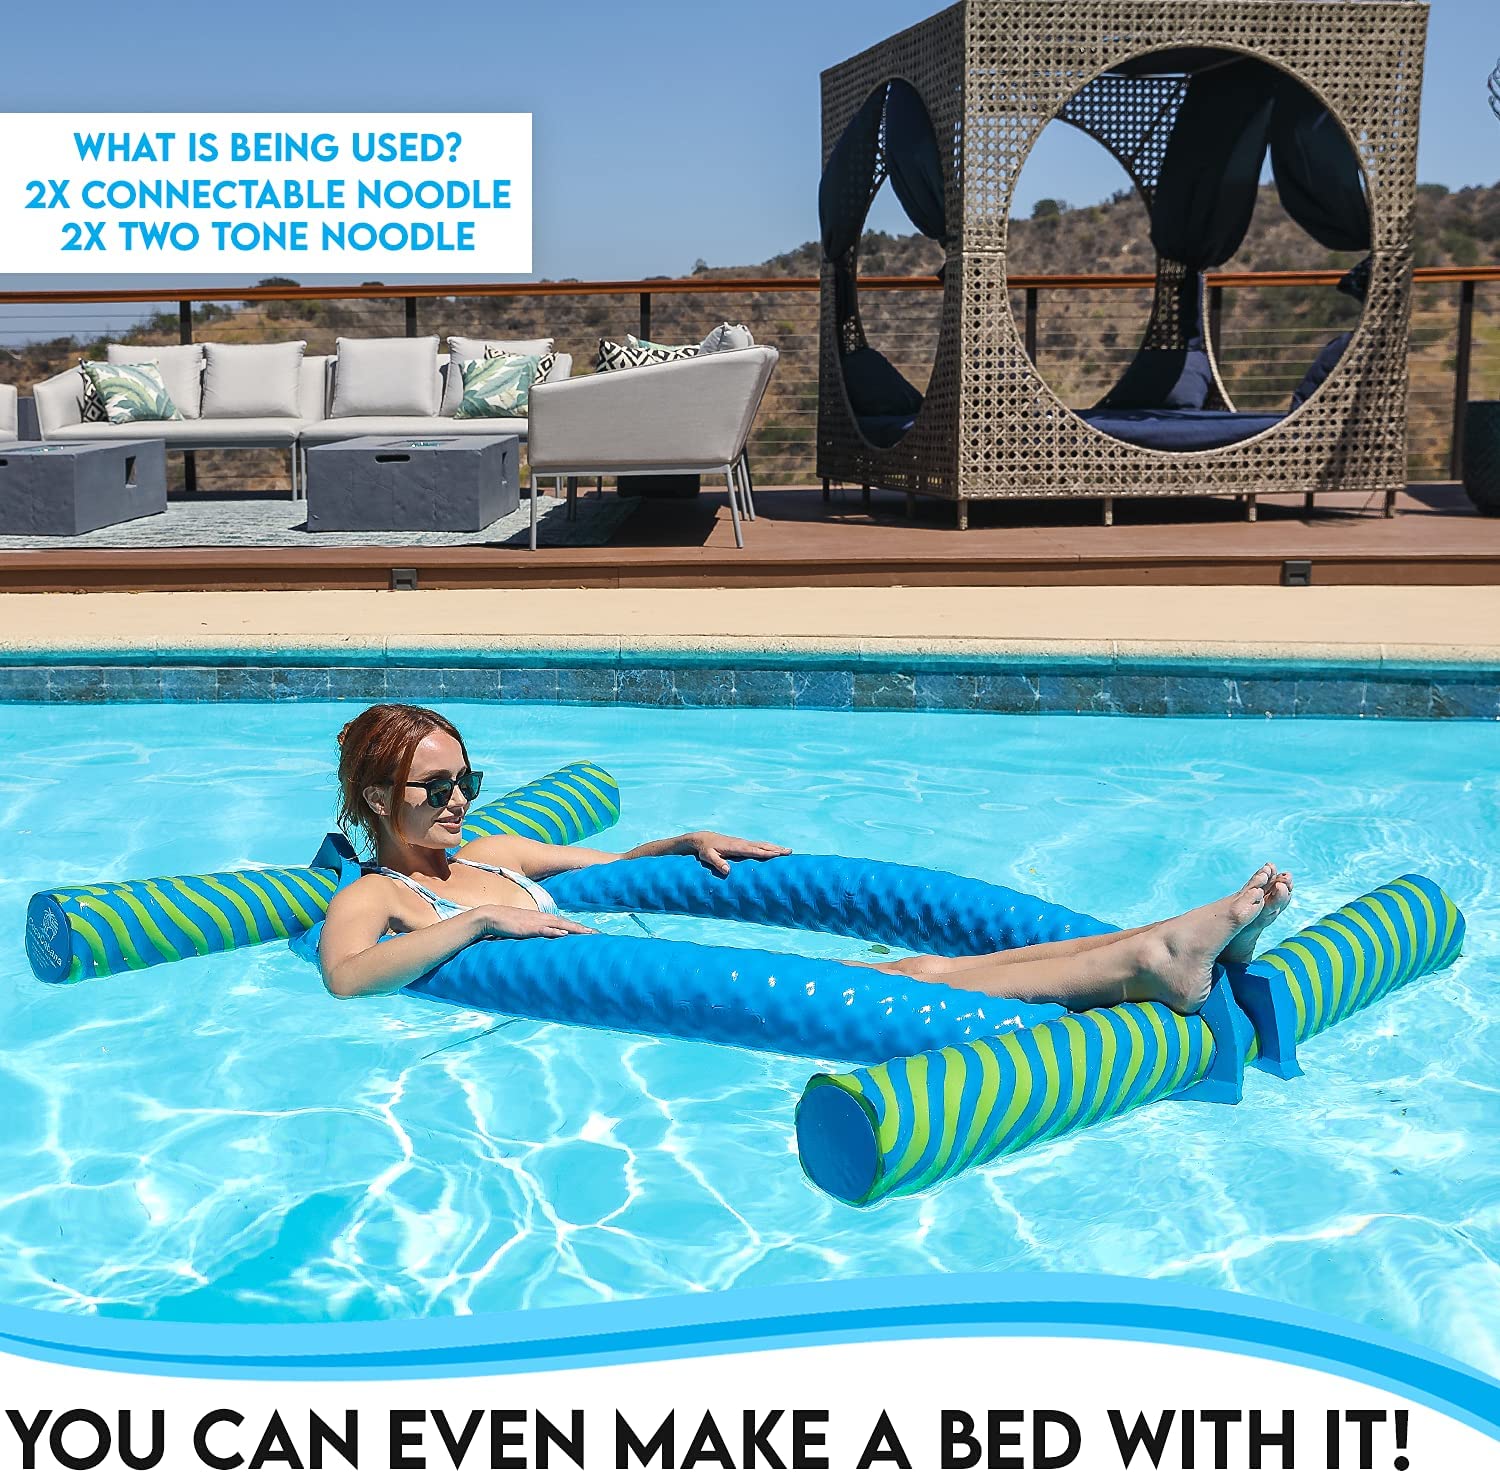 CocoCabana First Class Vinyl Foam Pool Noodles for Swimming and Floating, Pool Floats, Lake Floats Connectable Pool Noodle